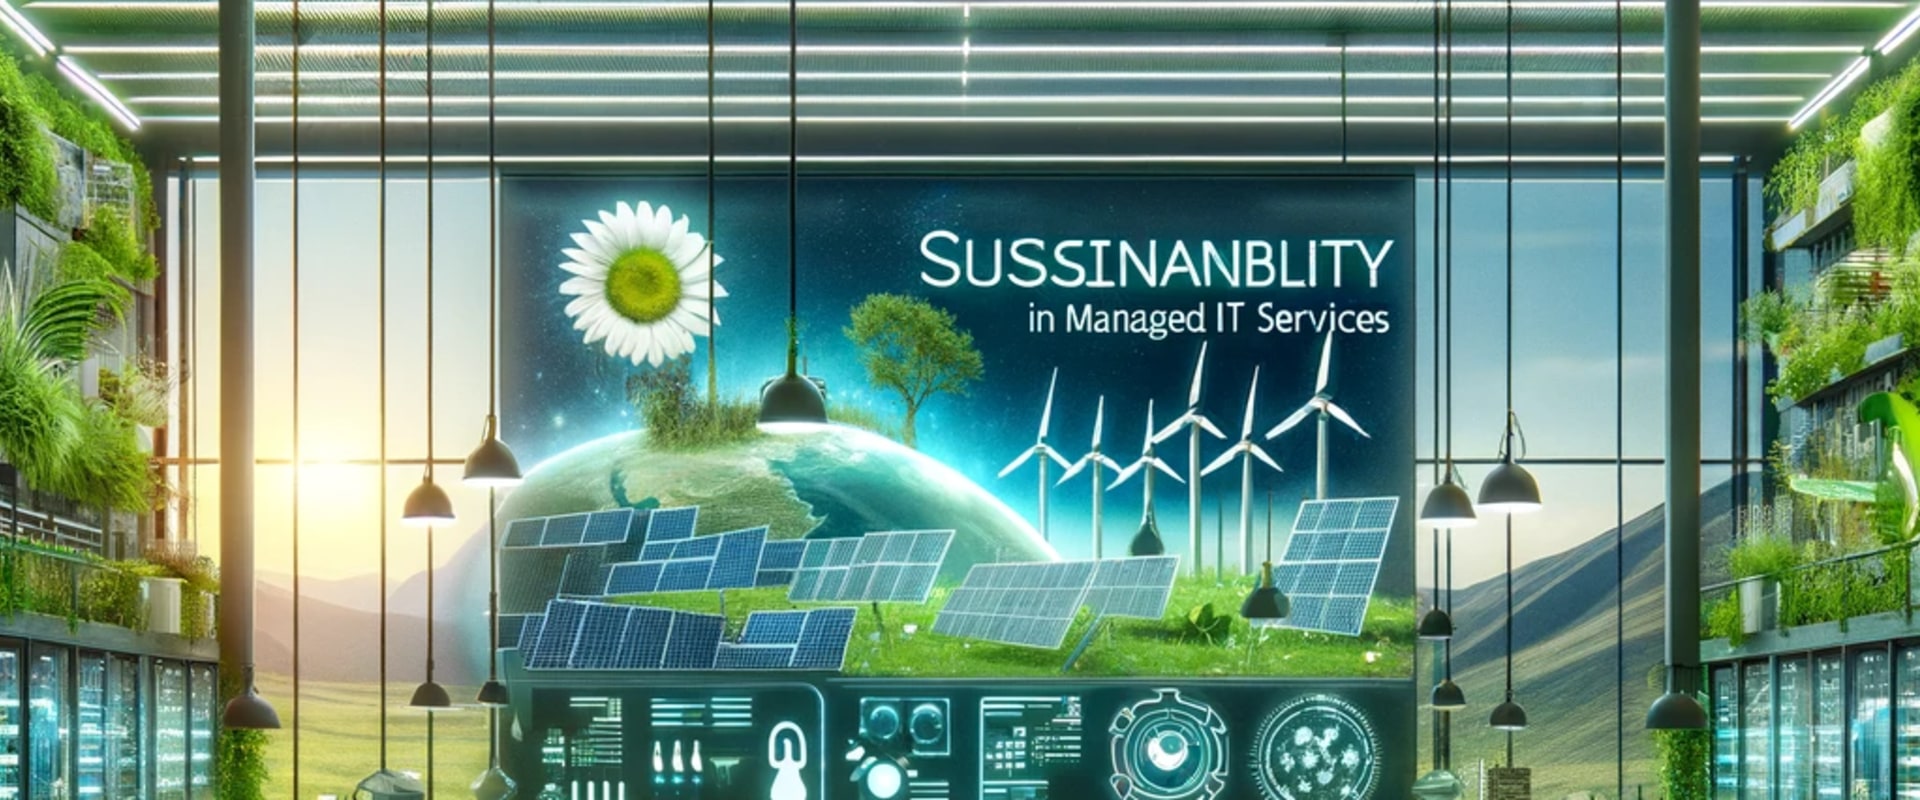 Sustainability Media Lab: Revolutionizing Managed IT Services for a Greener Future